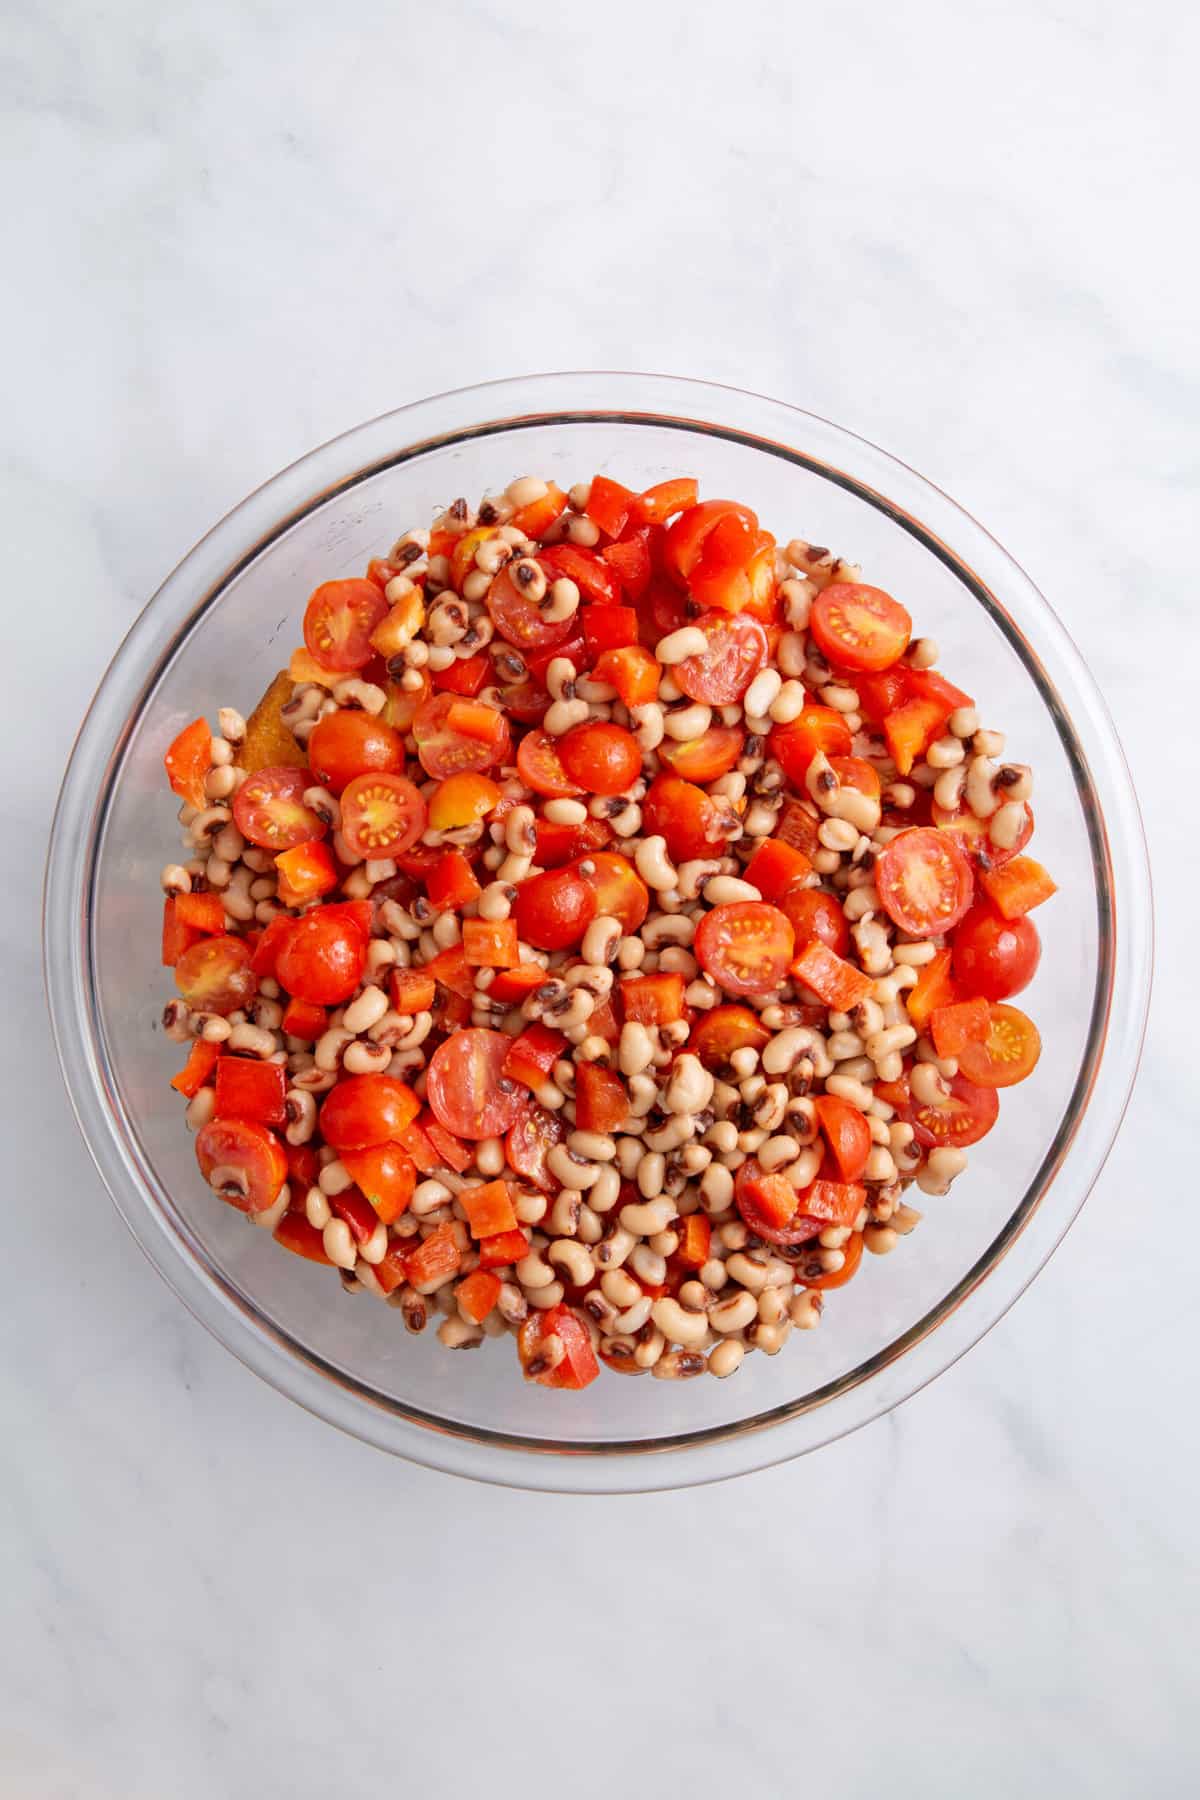 large glass bowl of black-eyed peas and halved cherry tomatoes.